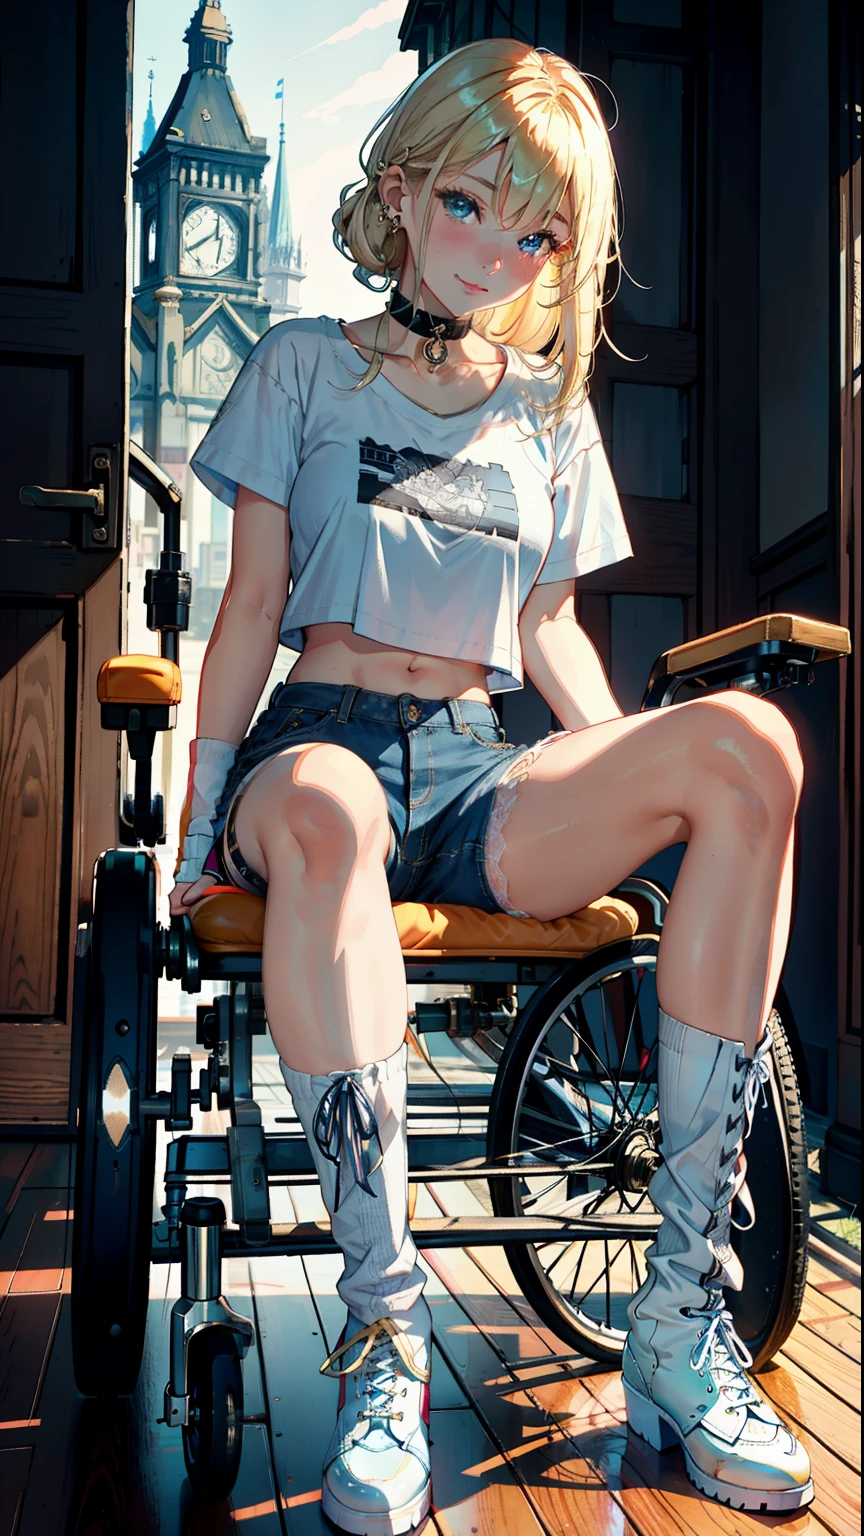 ​masterpiece, top-quality,  Detailed details, Detailed landscapes, beatiful lights, Beautiful Shadows, 1girl in, 23years old,Sitting in a wheelchair、Blue eyes,Mischievous smile, Blonde short、bangle,a choker,piercings,hotpants,Ultra-low rise,ＴShirt, Navel Ejection,White loose socks、lace-up boots、Open Finger Gloves、detailed skin textures, Tyndall effect